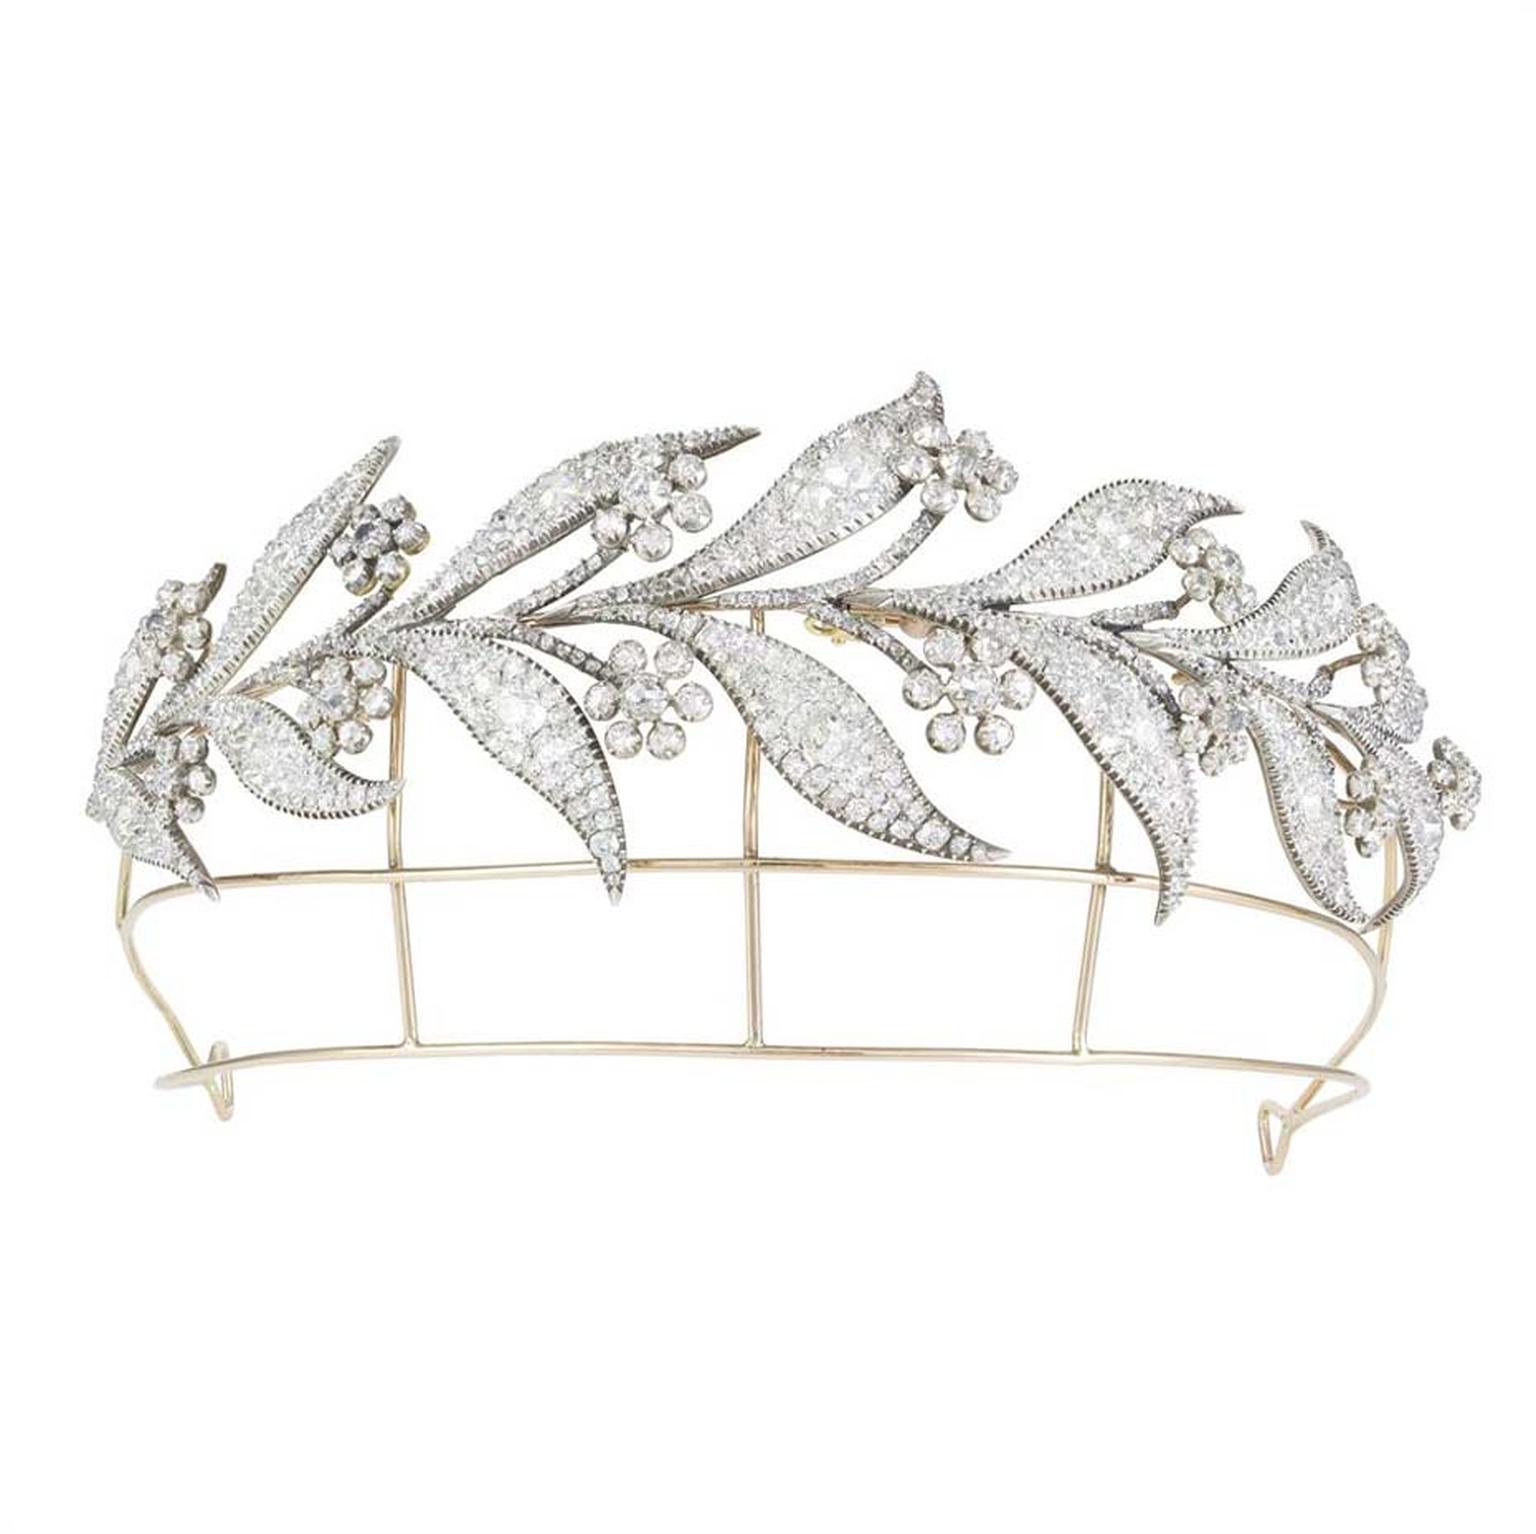 The so-called Downton Abbey tiara dates back to the 1800s and is pavé set with 45ct of old-cut diamonds. Currently for sale at Bentley & Skinner, it was originally given to Princess Louise on her wedding day in 1889 and, more recently, was worn by Lady Ma